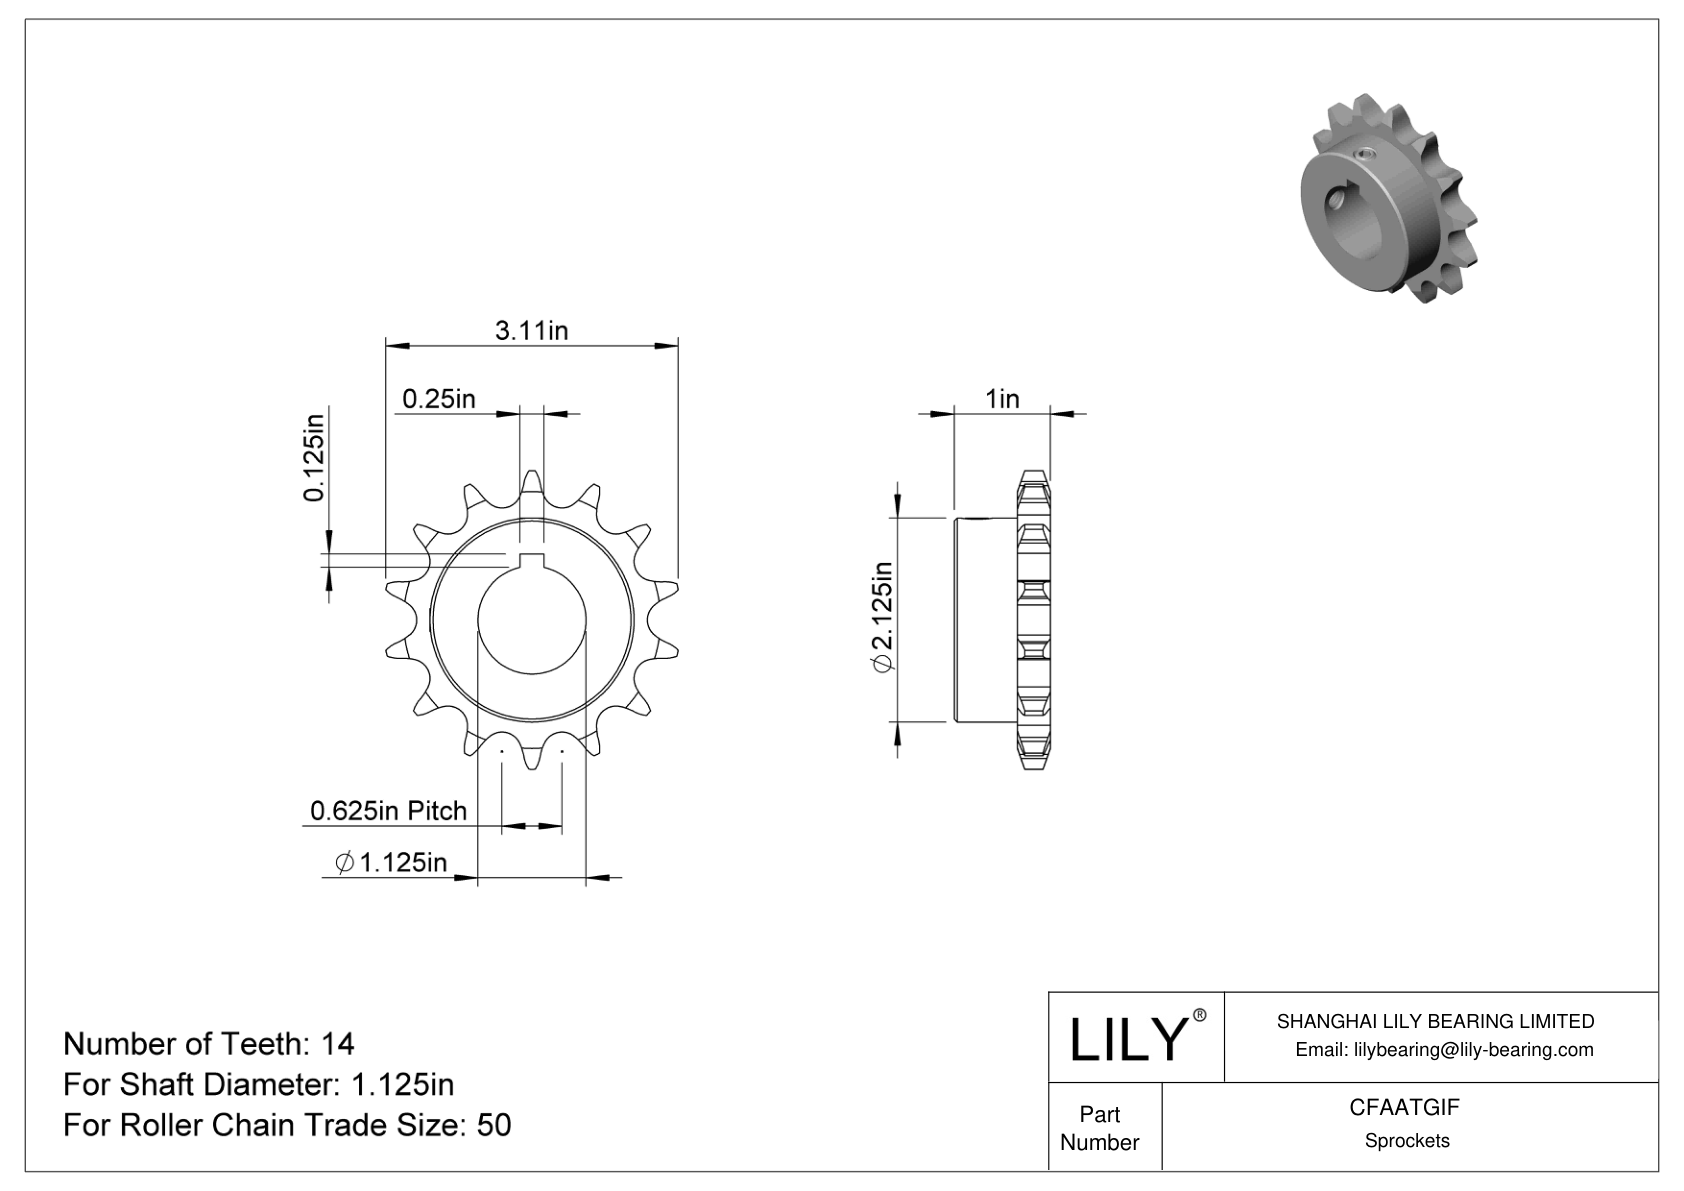 CFAATGIF Wear-Resistant Sprockets for ANSI Roller Chain cad drawing